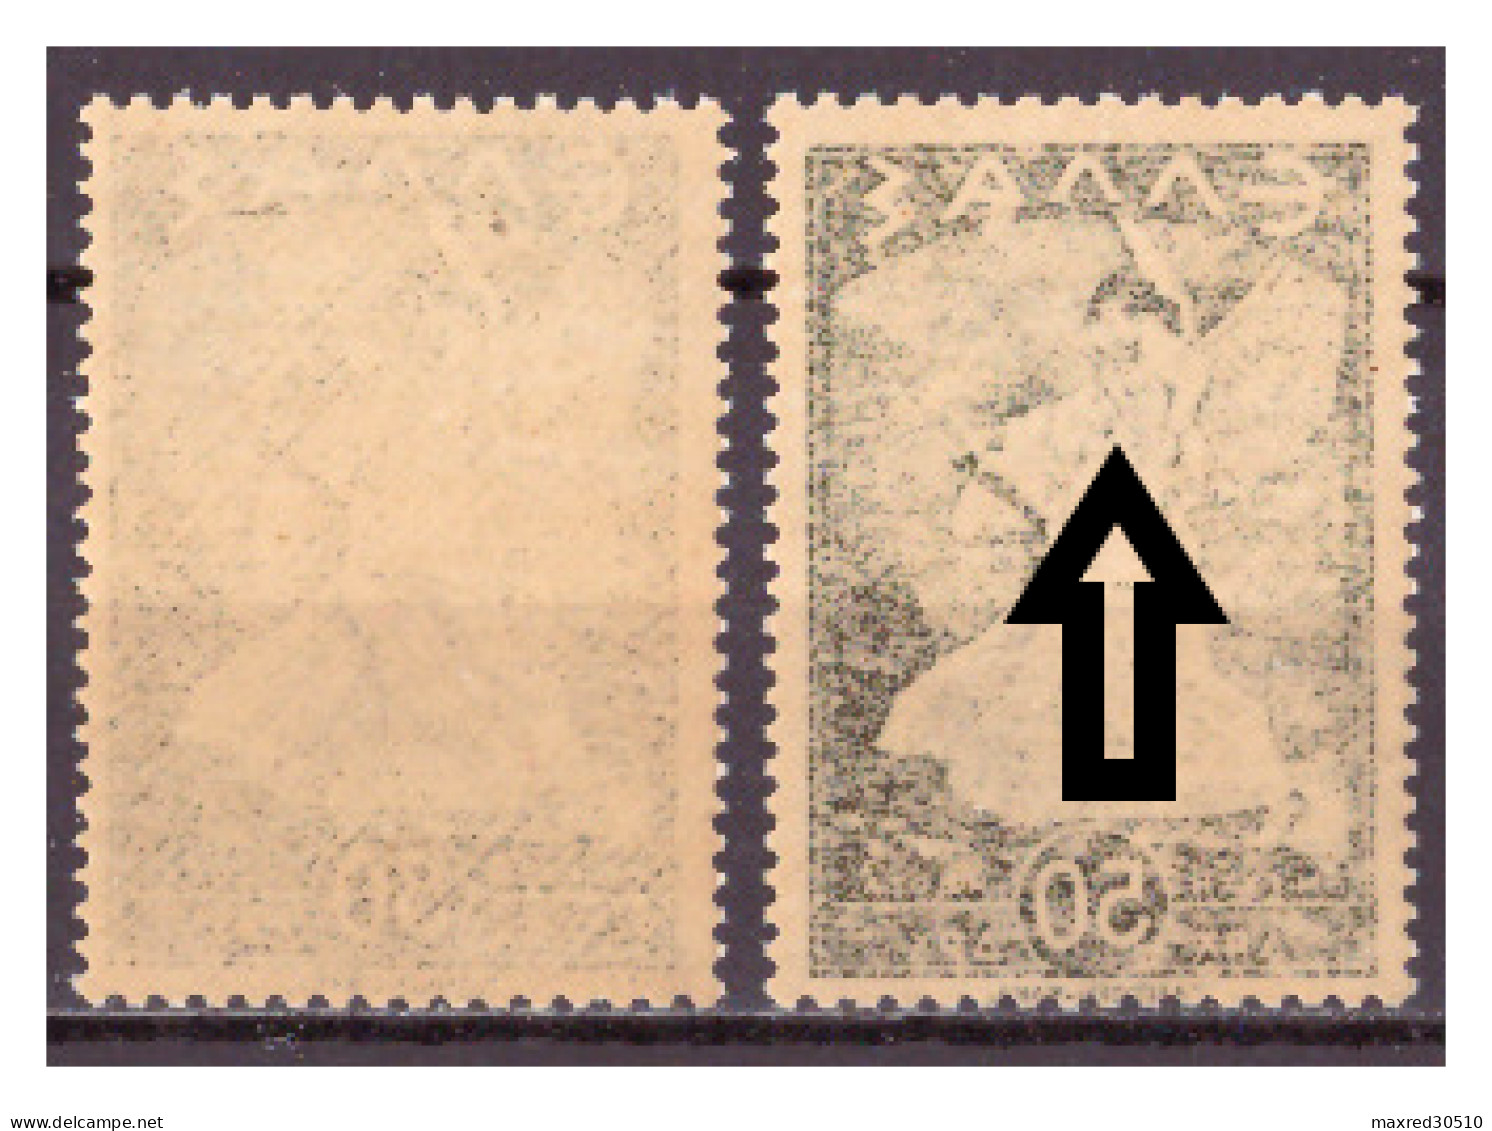 GREECE 1945 2X50L. OF THE "GLORY ISSUE" THE 2ND ONE (SEE ARROWS) WITH MIRROR PRINTING AT THE GUM ERROR MNH - Varietà & Curiosità